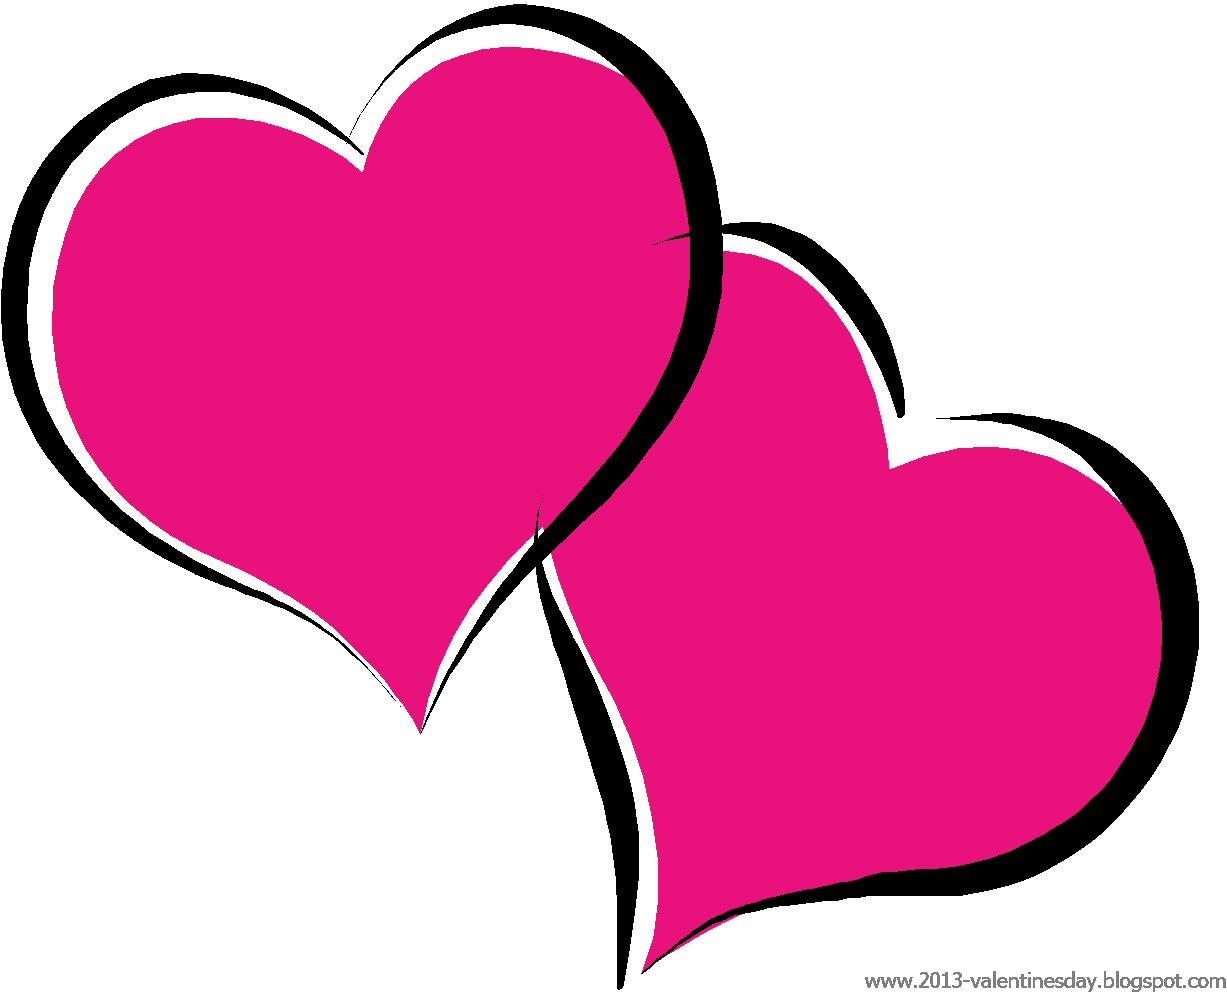 Valentines day Clip Art Collection 2014